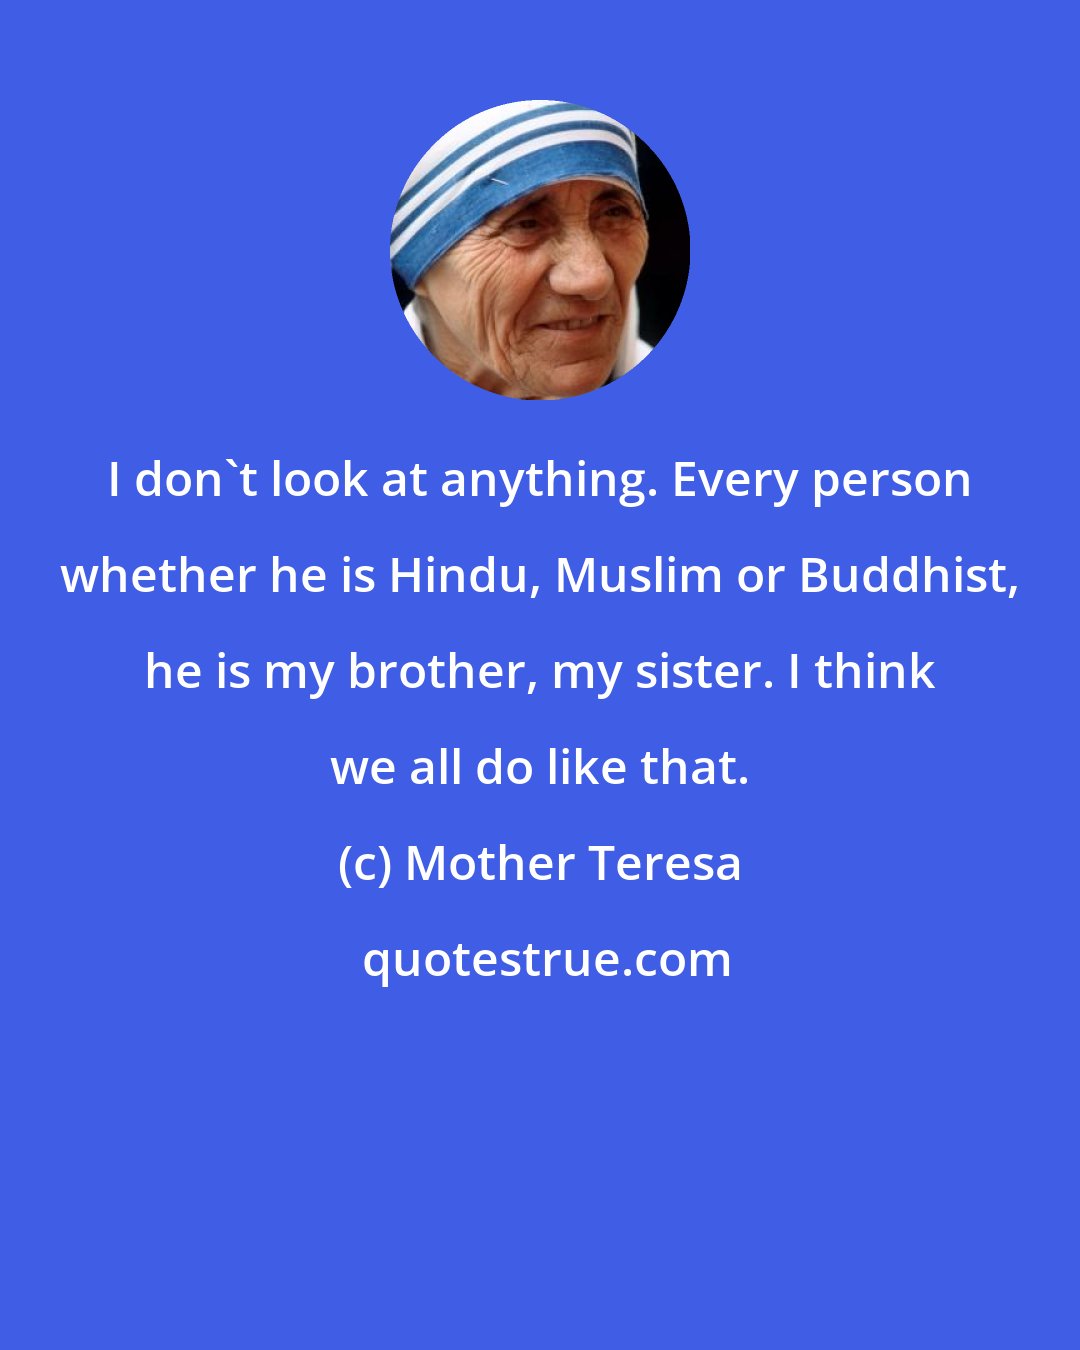 Mother Teresa: I don't look at anything. Every person whether he is Hindu, Muslim or Buddhist, he is my brother, my sister. I think we all do like that.